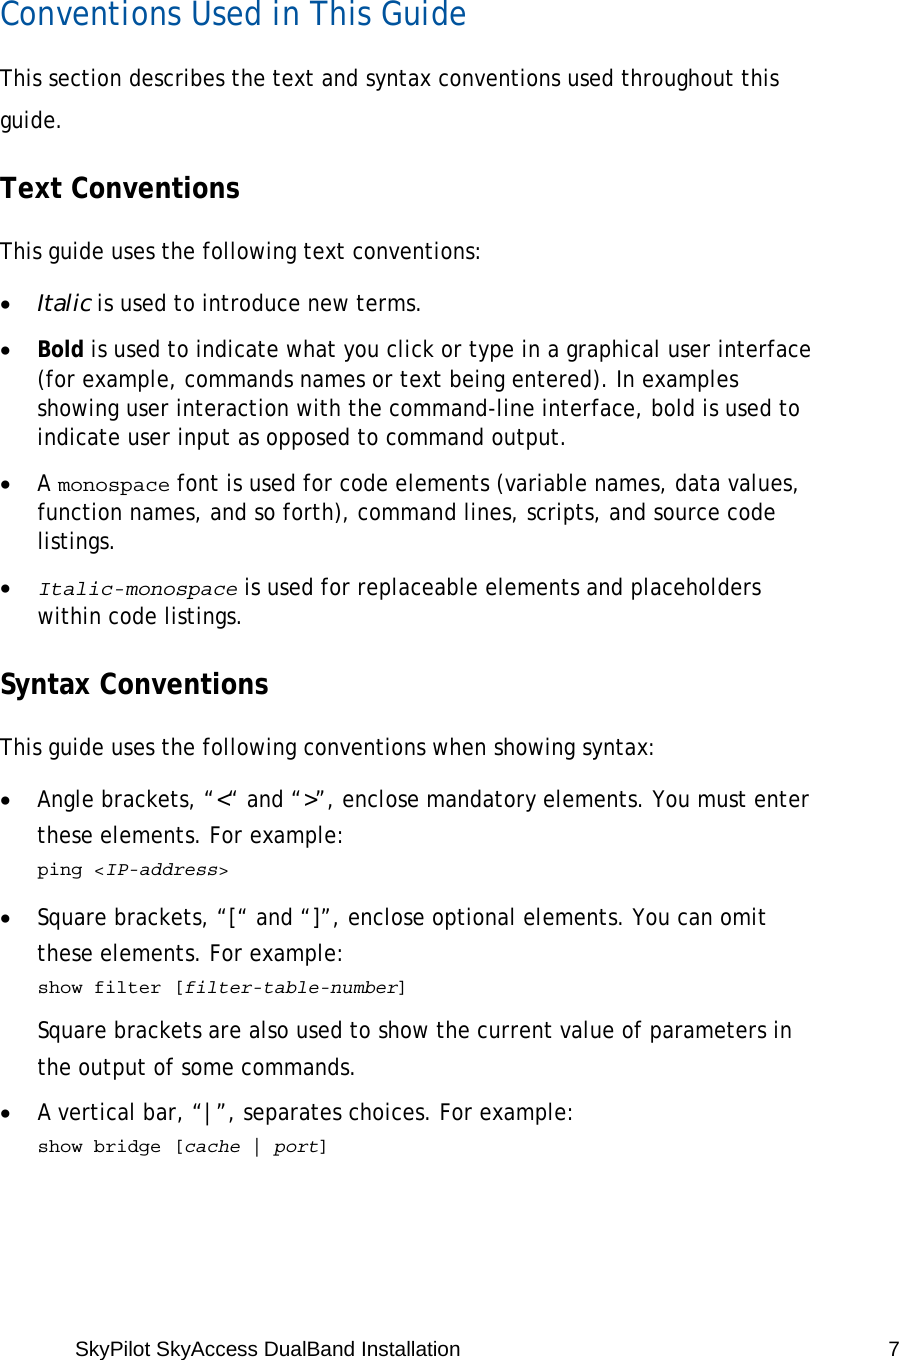 SkyPilot SkyAccess DualBand Installation   7  Conventions Used in This Guide This section describes the text and syntax conventions used throughout this guide. Text Conventions This guide uses the following text conventions: • Italic is used to introduce new terms. • Bold is used to indicate what you click or type in a graphical user interface (for example, commands names or text being entered). In examples showing user interaction with the command-line interface, bold is used to indicate user input as opposed to command output. • A monospace font is used for code elements (variable names, data values, function names, and so forth), command lines, scripts, and source code listings. • Italic-monospace is used for replaceable elements and placeholders within code listings. Syntax Conventions This guide uses the following conventions when showing syntax: • Angle brackets, “&lt;“ and “&gt;”, enclose mandatory elements. You must enter these elements. For example:  ping &lt;IP-address&gt; • Square brackets, “[“ and “]”, enclose optional elements. You can omit these elements. For example:   show filter [filter-table-number] Square brackets are also used to show the current value of parameters in the output of some commands. • A vertical bar, “|”, separates choices. For example:   show bridge [cache | port] 